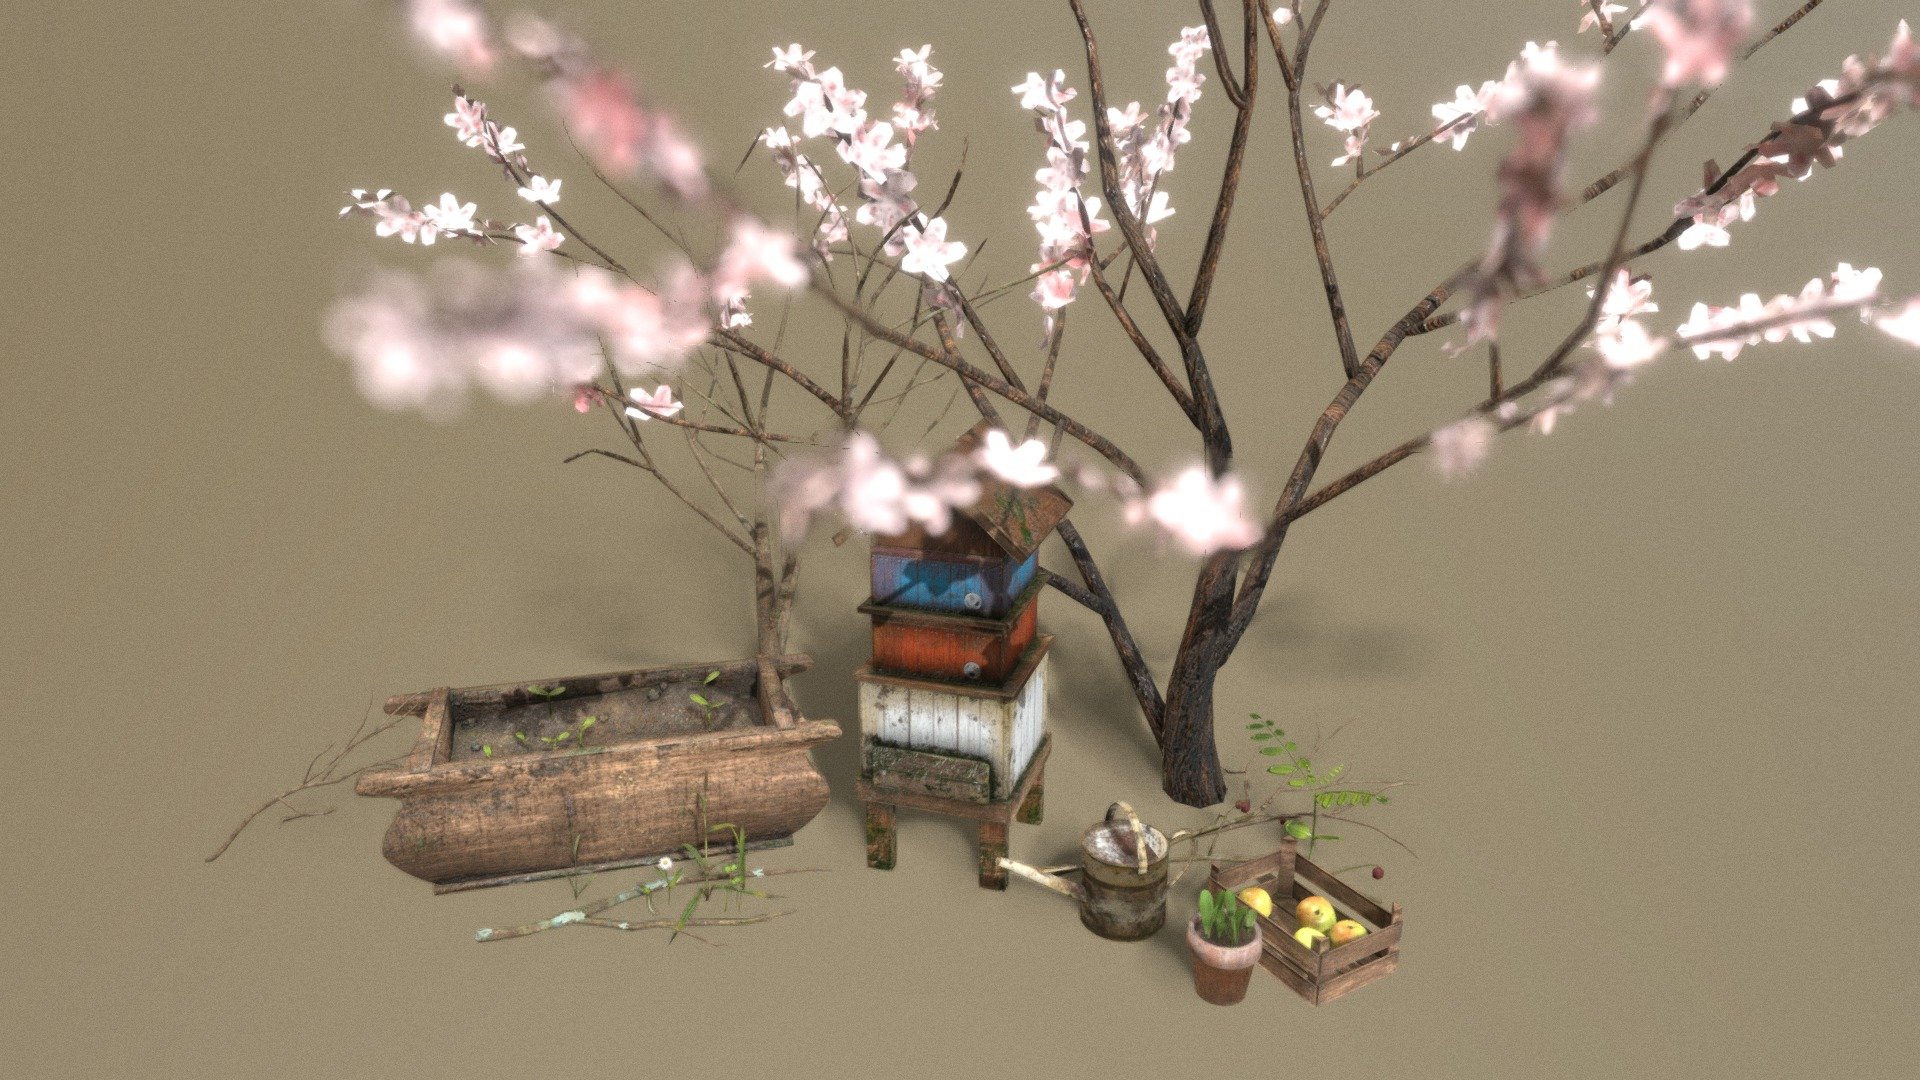 Spring gardening asset pack with a beehive, sakura tree, old wooden washtub, watering can, crate with apples, potted lettuce, flowers, sprouts, grass, and some branches 3d model